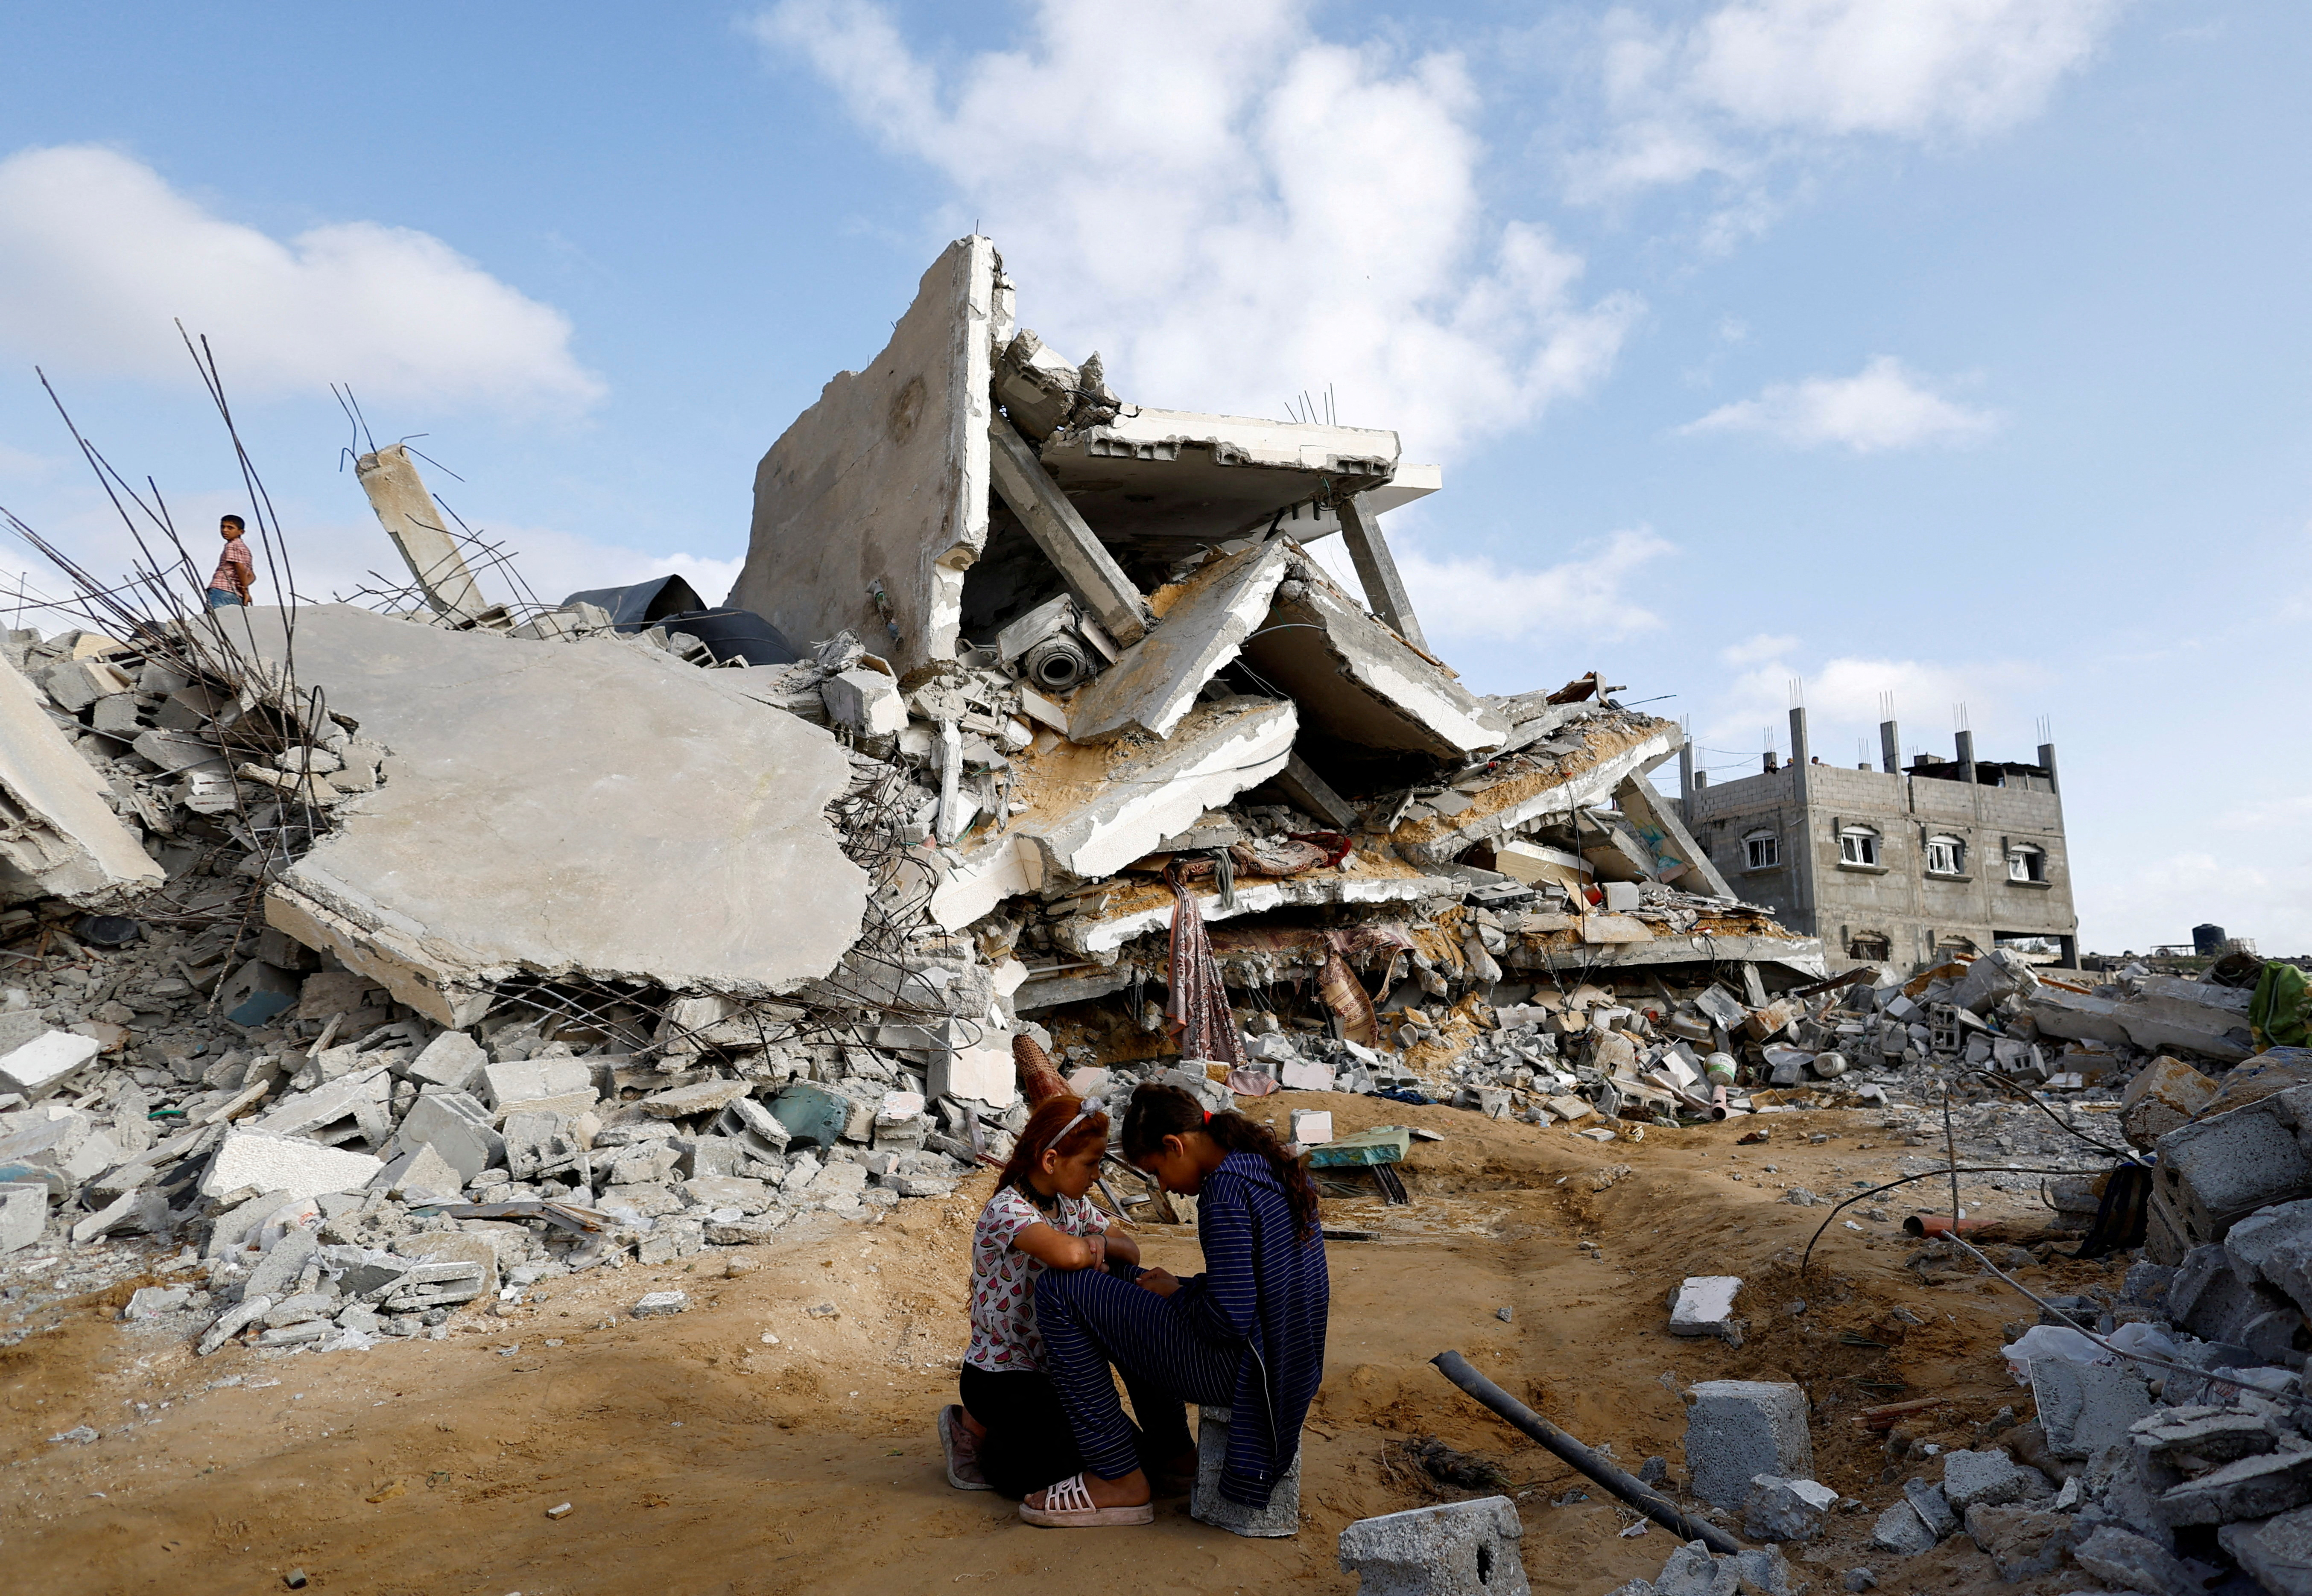 Palestinian children sit next to the site of an Israeli strike on a house, in Rafah